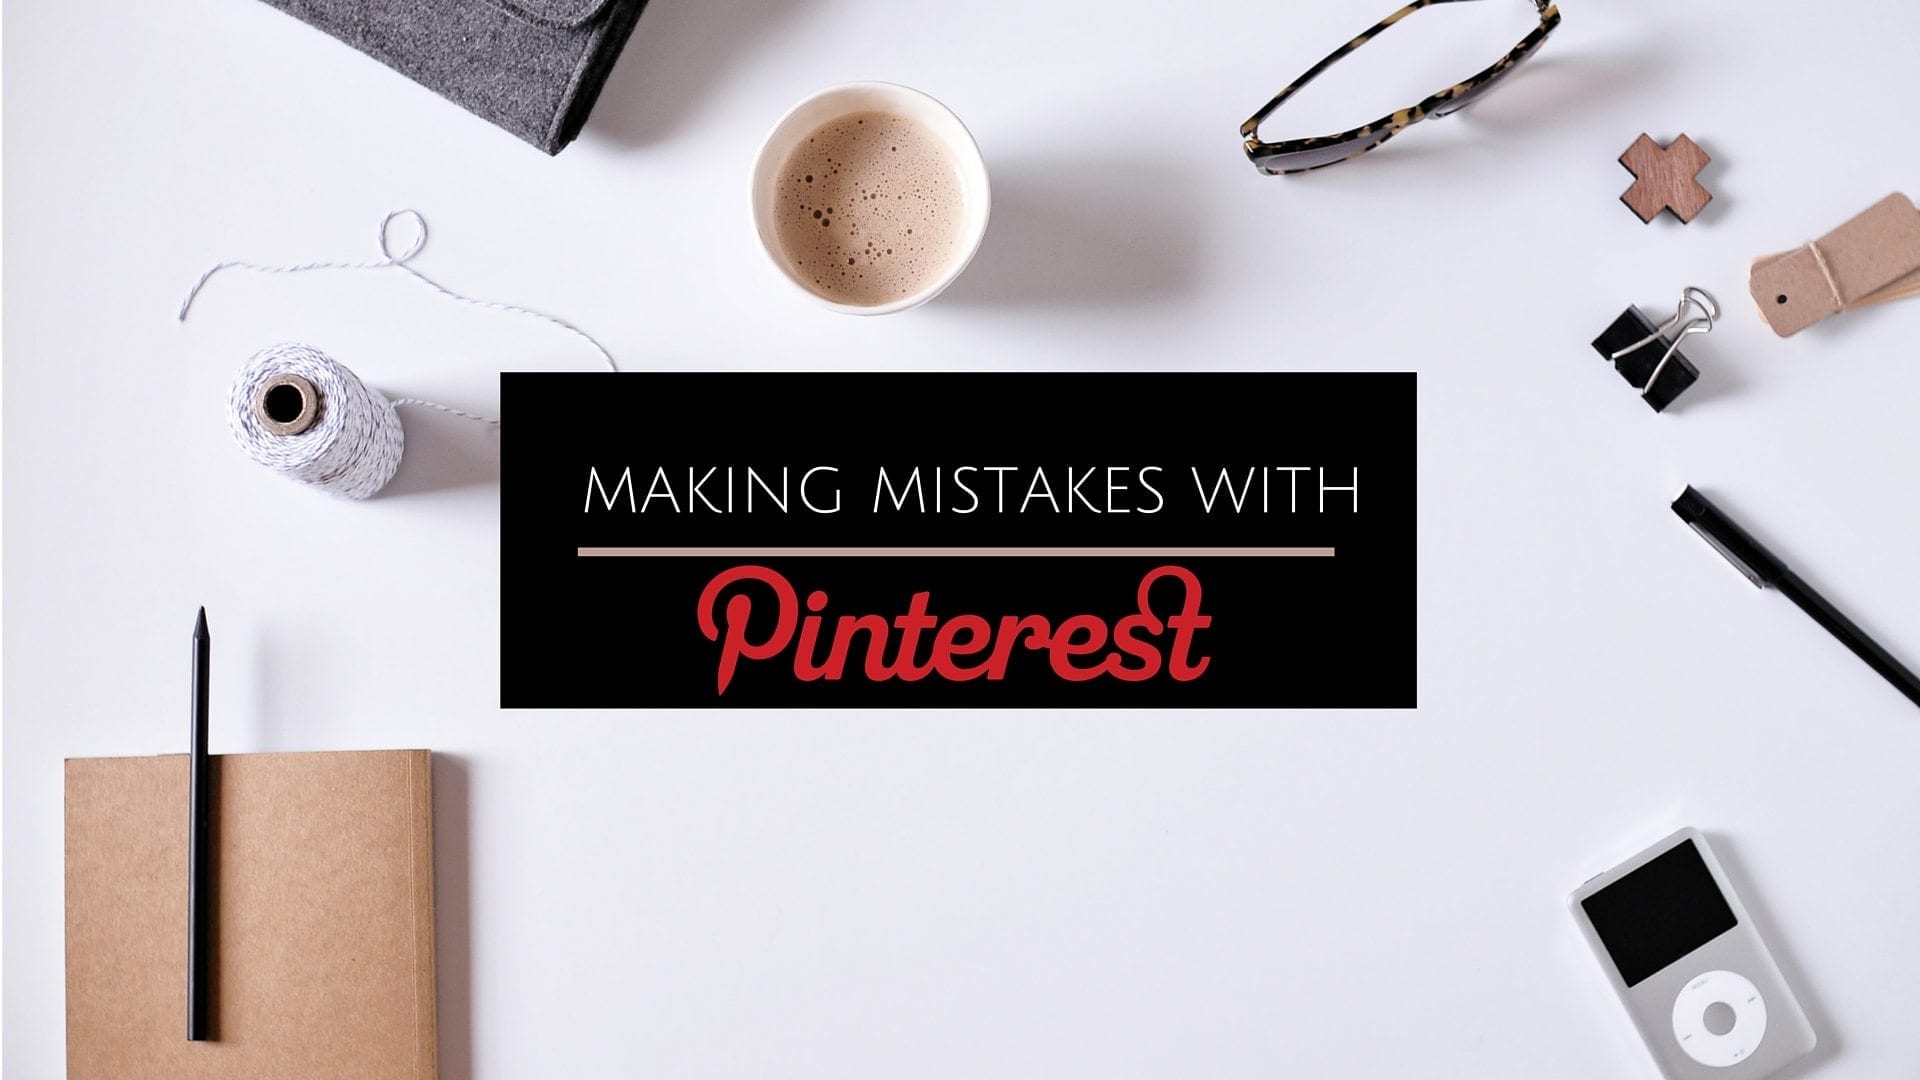 How to Use Pinterest the Wrong Way